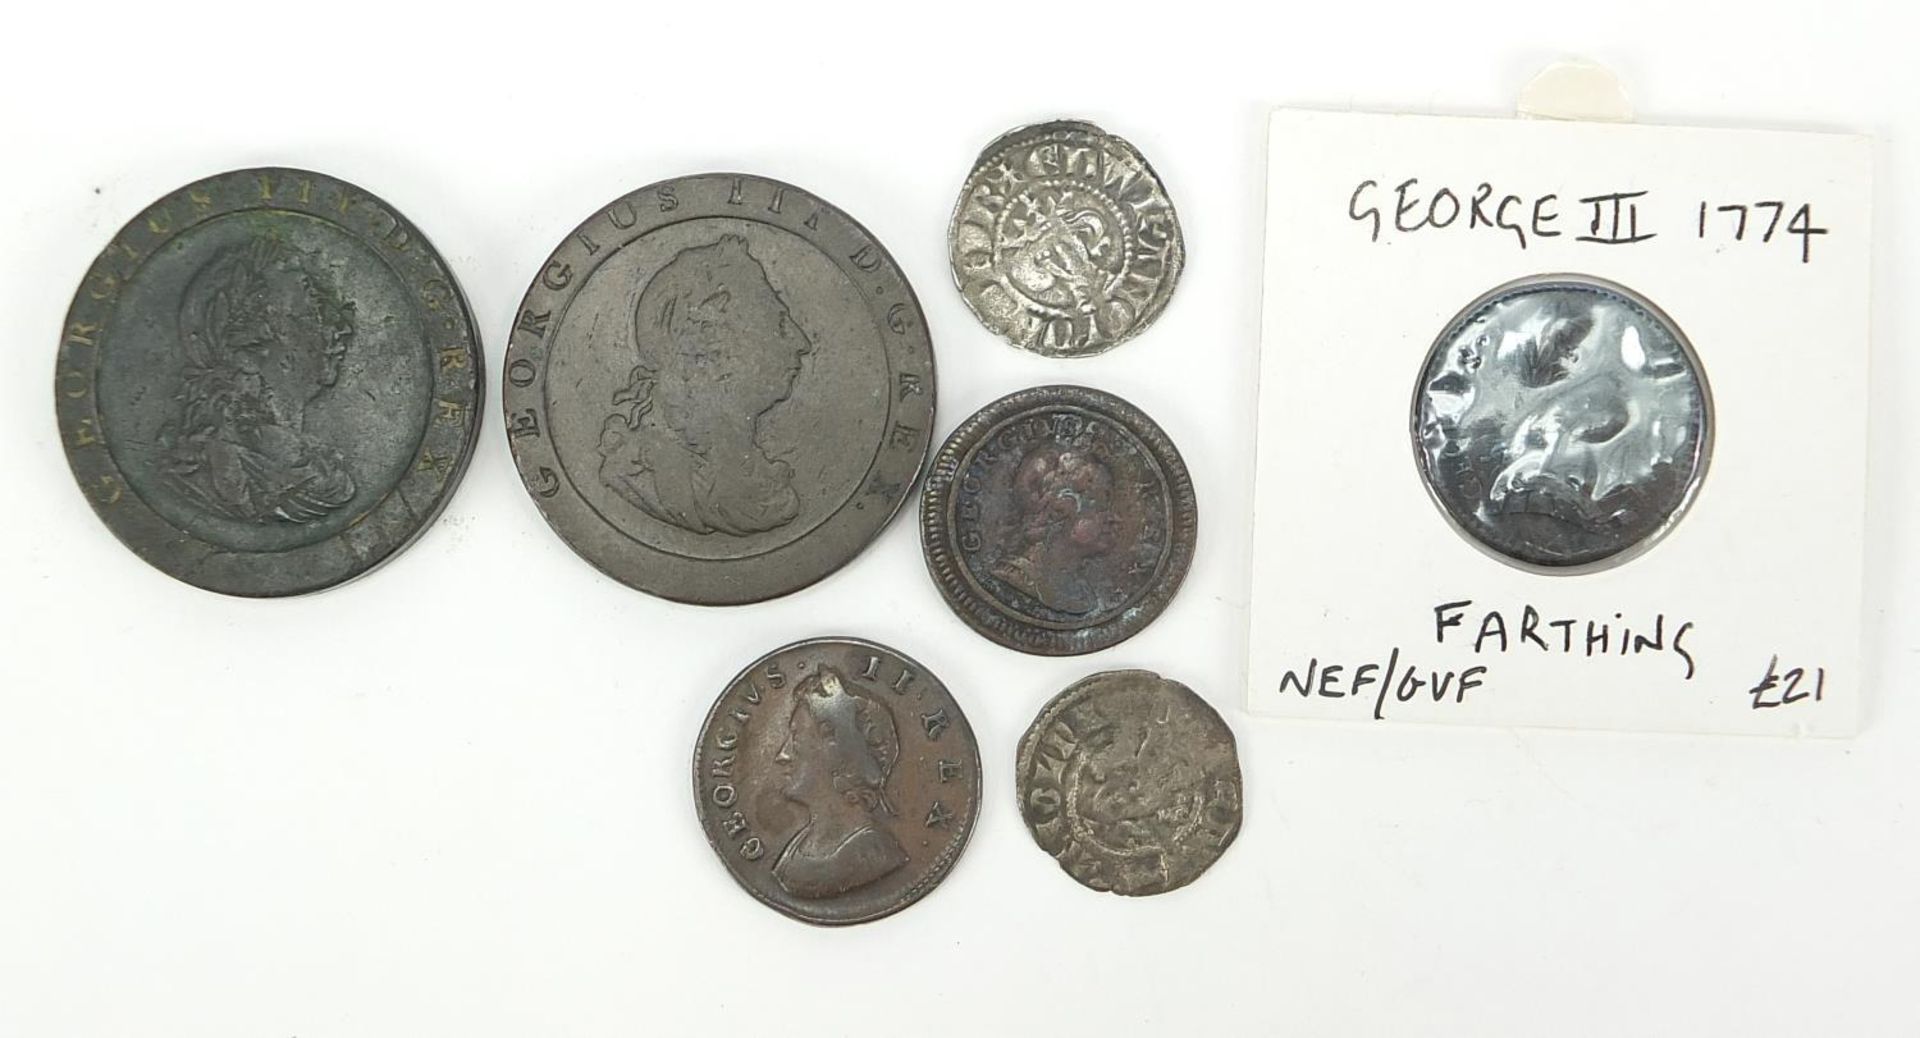 Hammered and later British coinage, some silver, including two Edward I pennies and George III